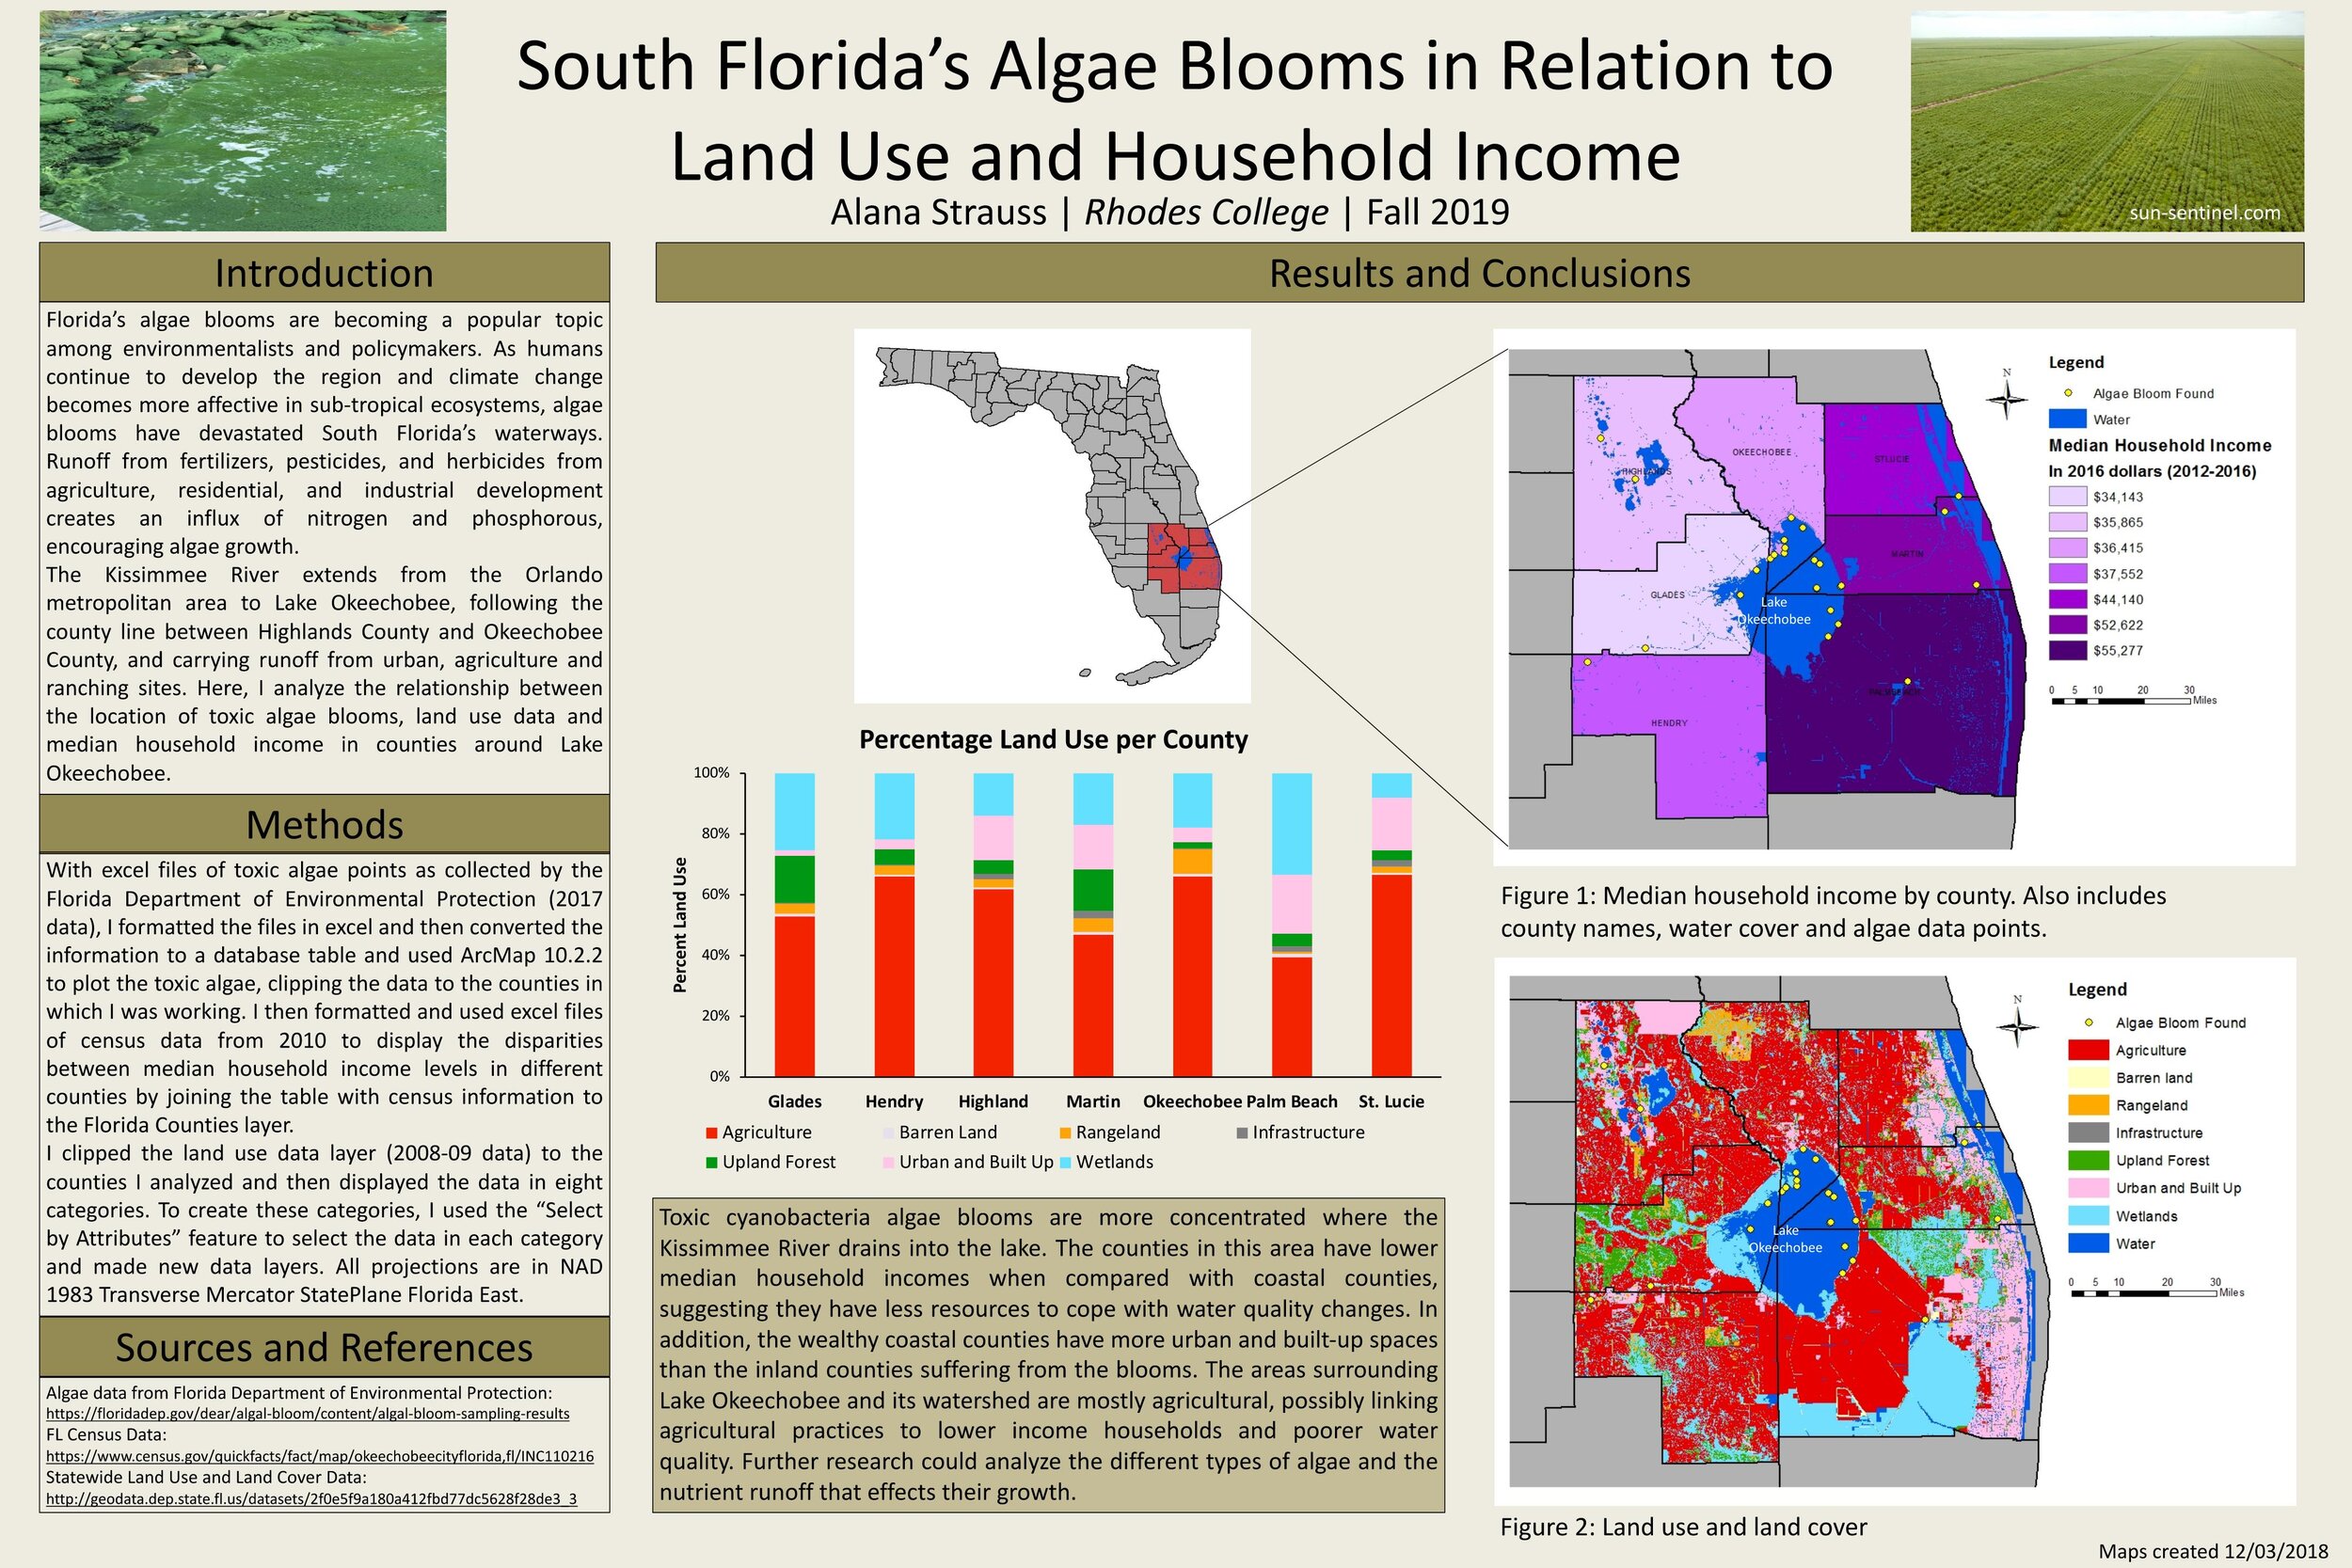 South Florida's Algae Blooms in Relation to Land Use and Household Income